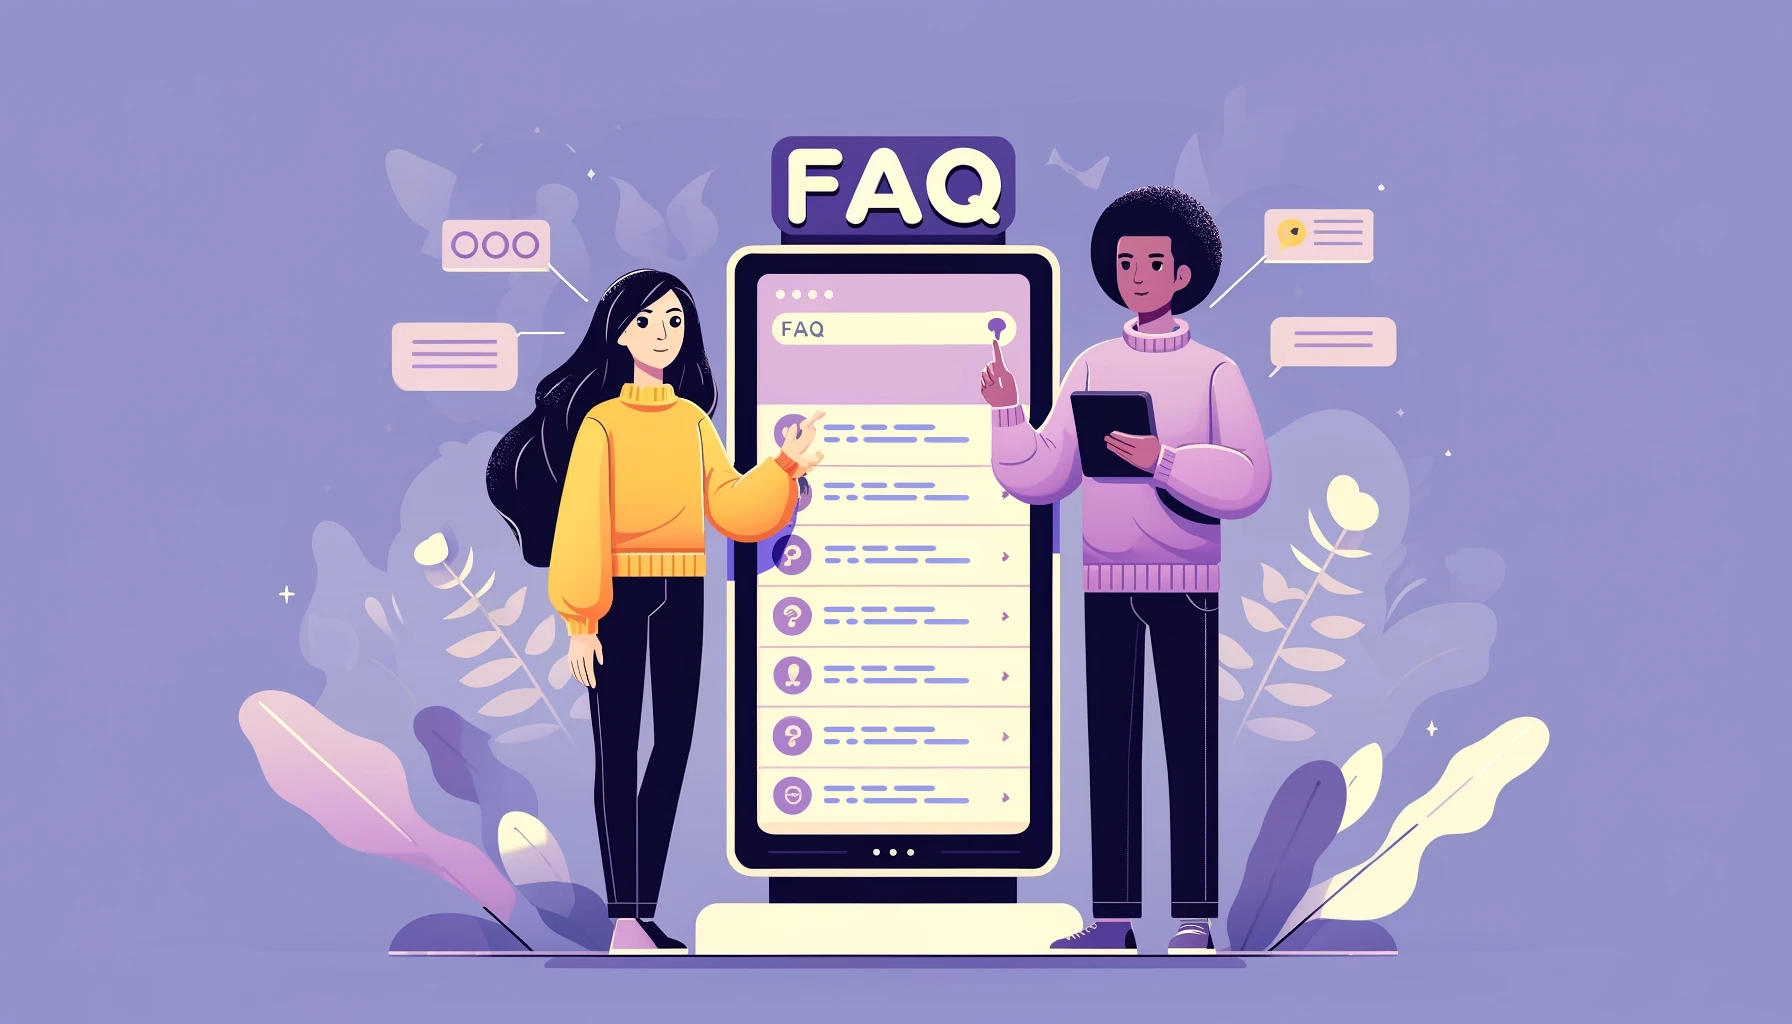 An illustration of two characters interacting with digital FAQ displays in a modern, tech-savvy environment, set against a soft purple background with abstract plant decorations.